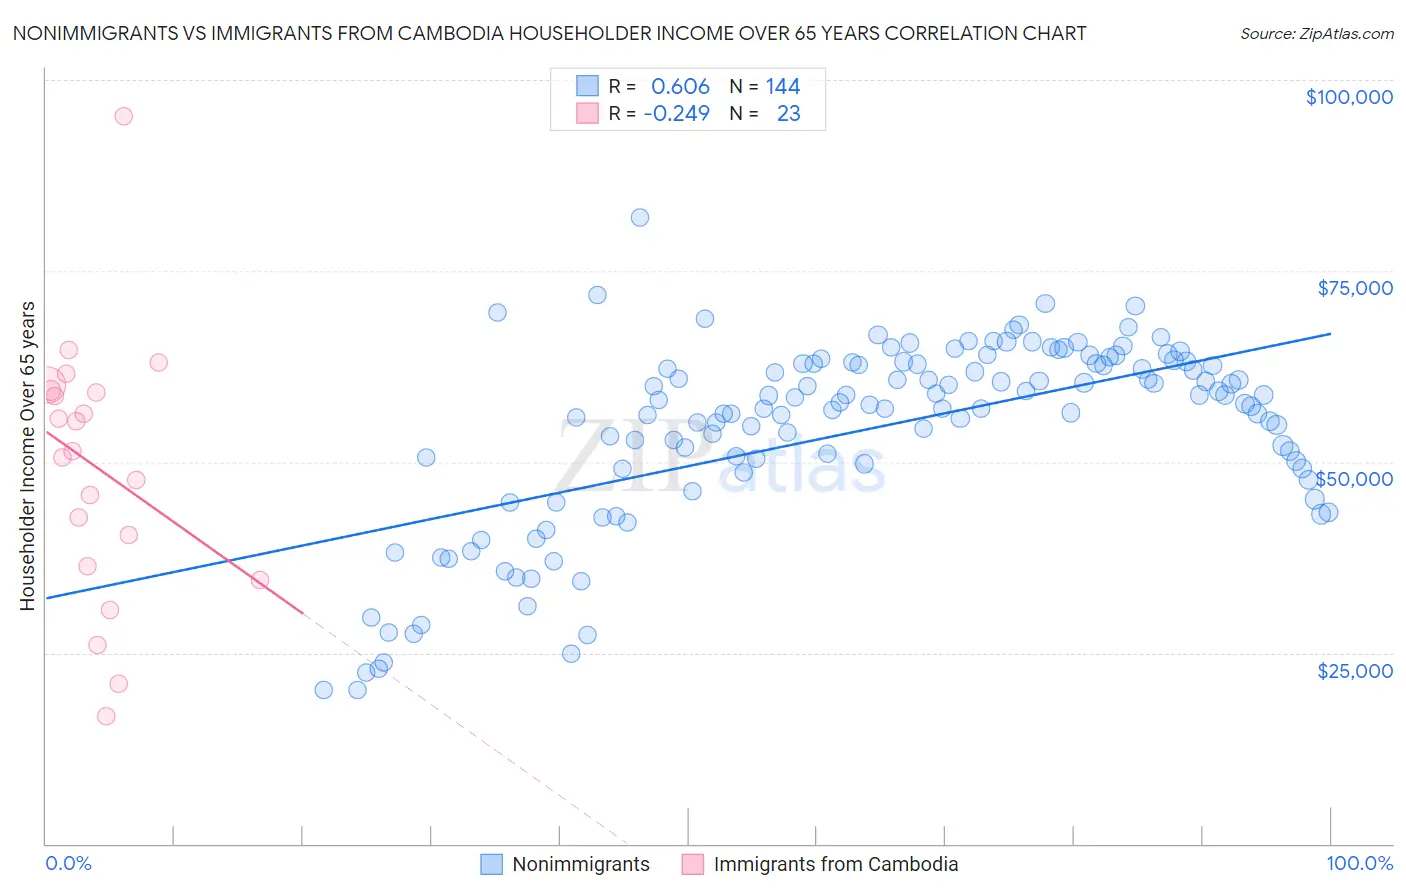 Nonimmigrants vs Immigrants from Cambodia Householder Income Over 65 years